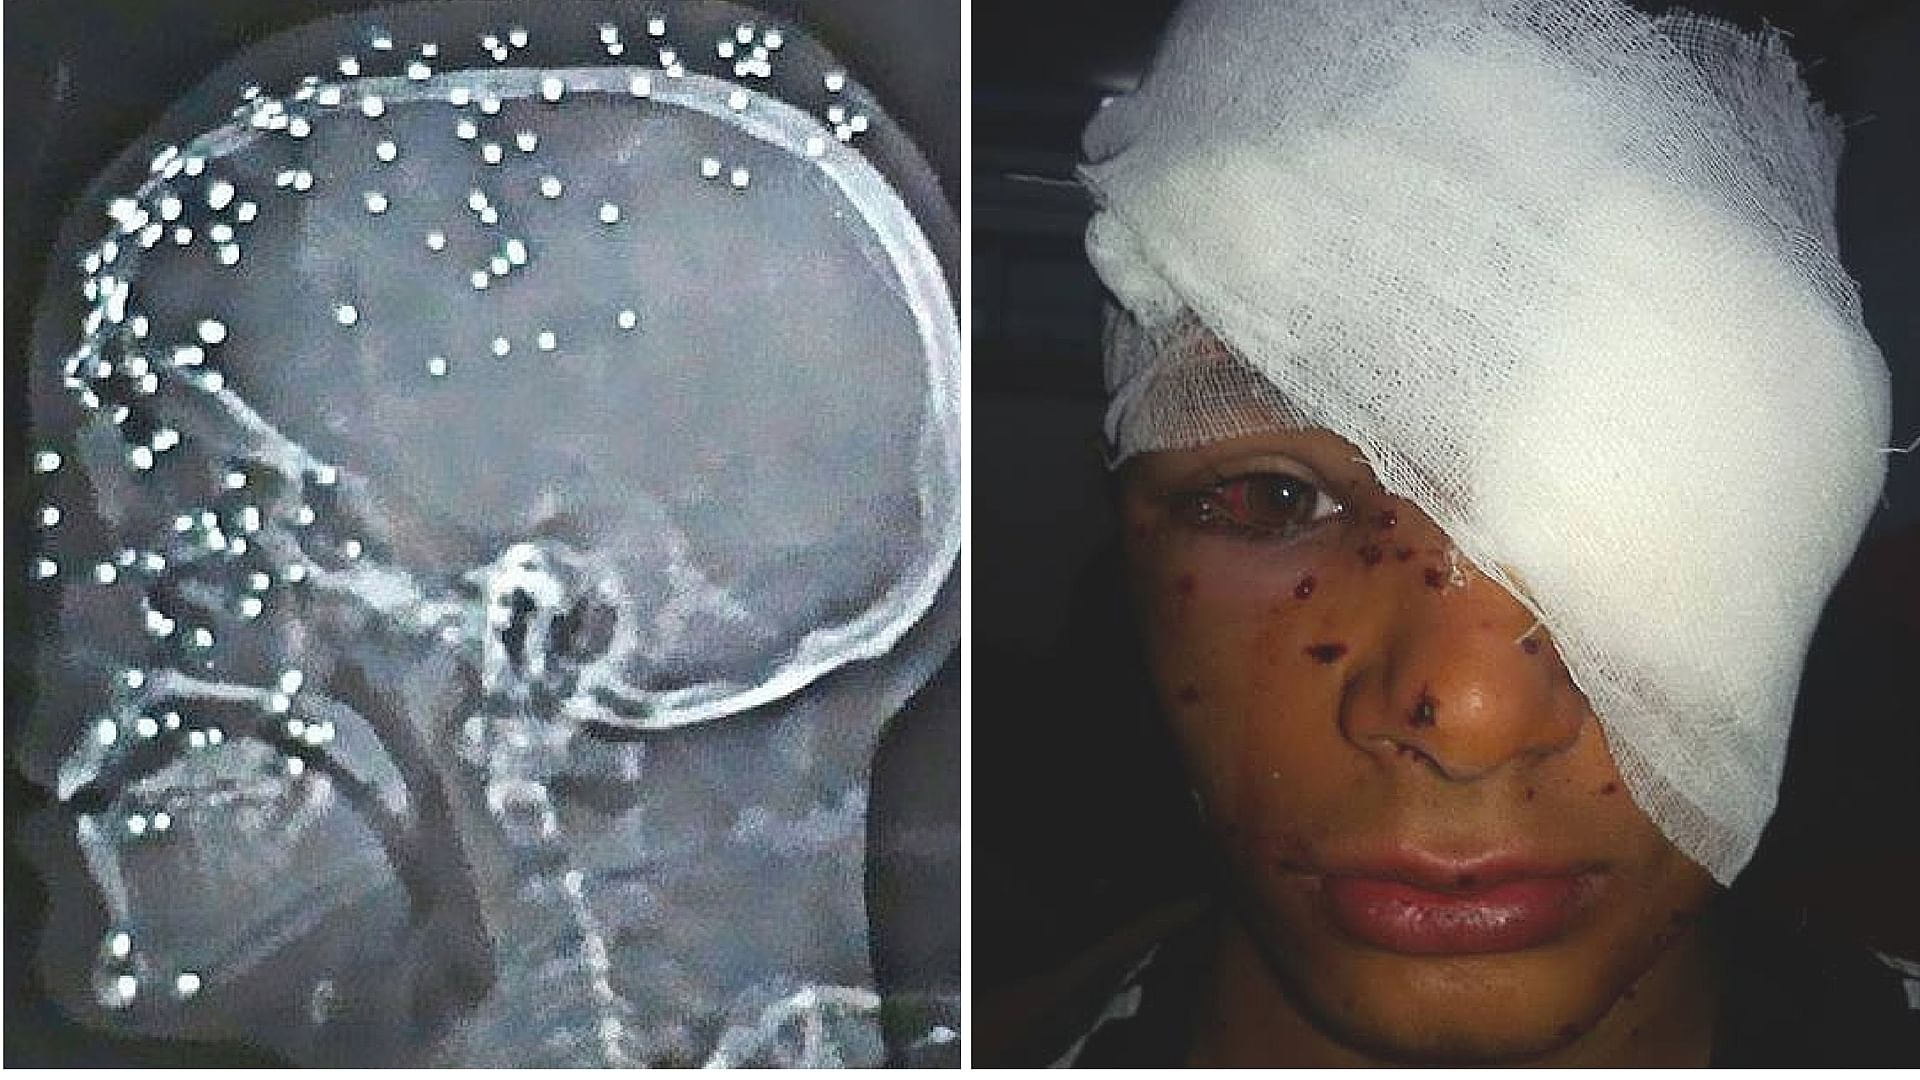 An X-ray showing pellet injuries to a skull (L). A class 10 student who was injured in March (R). The X-ray and the photograph are unrelated. (Photo Courtesy: Facebook/<a href="https://www.facebook.com/kashmirscarsofpelletgun/?fref=ts">Kashmir Scars of Pellet Gun</a>)